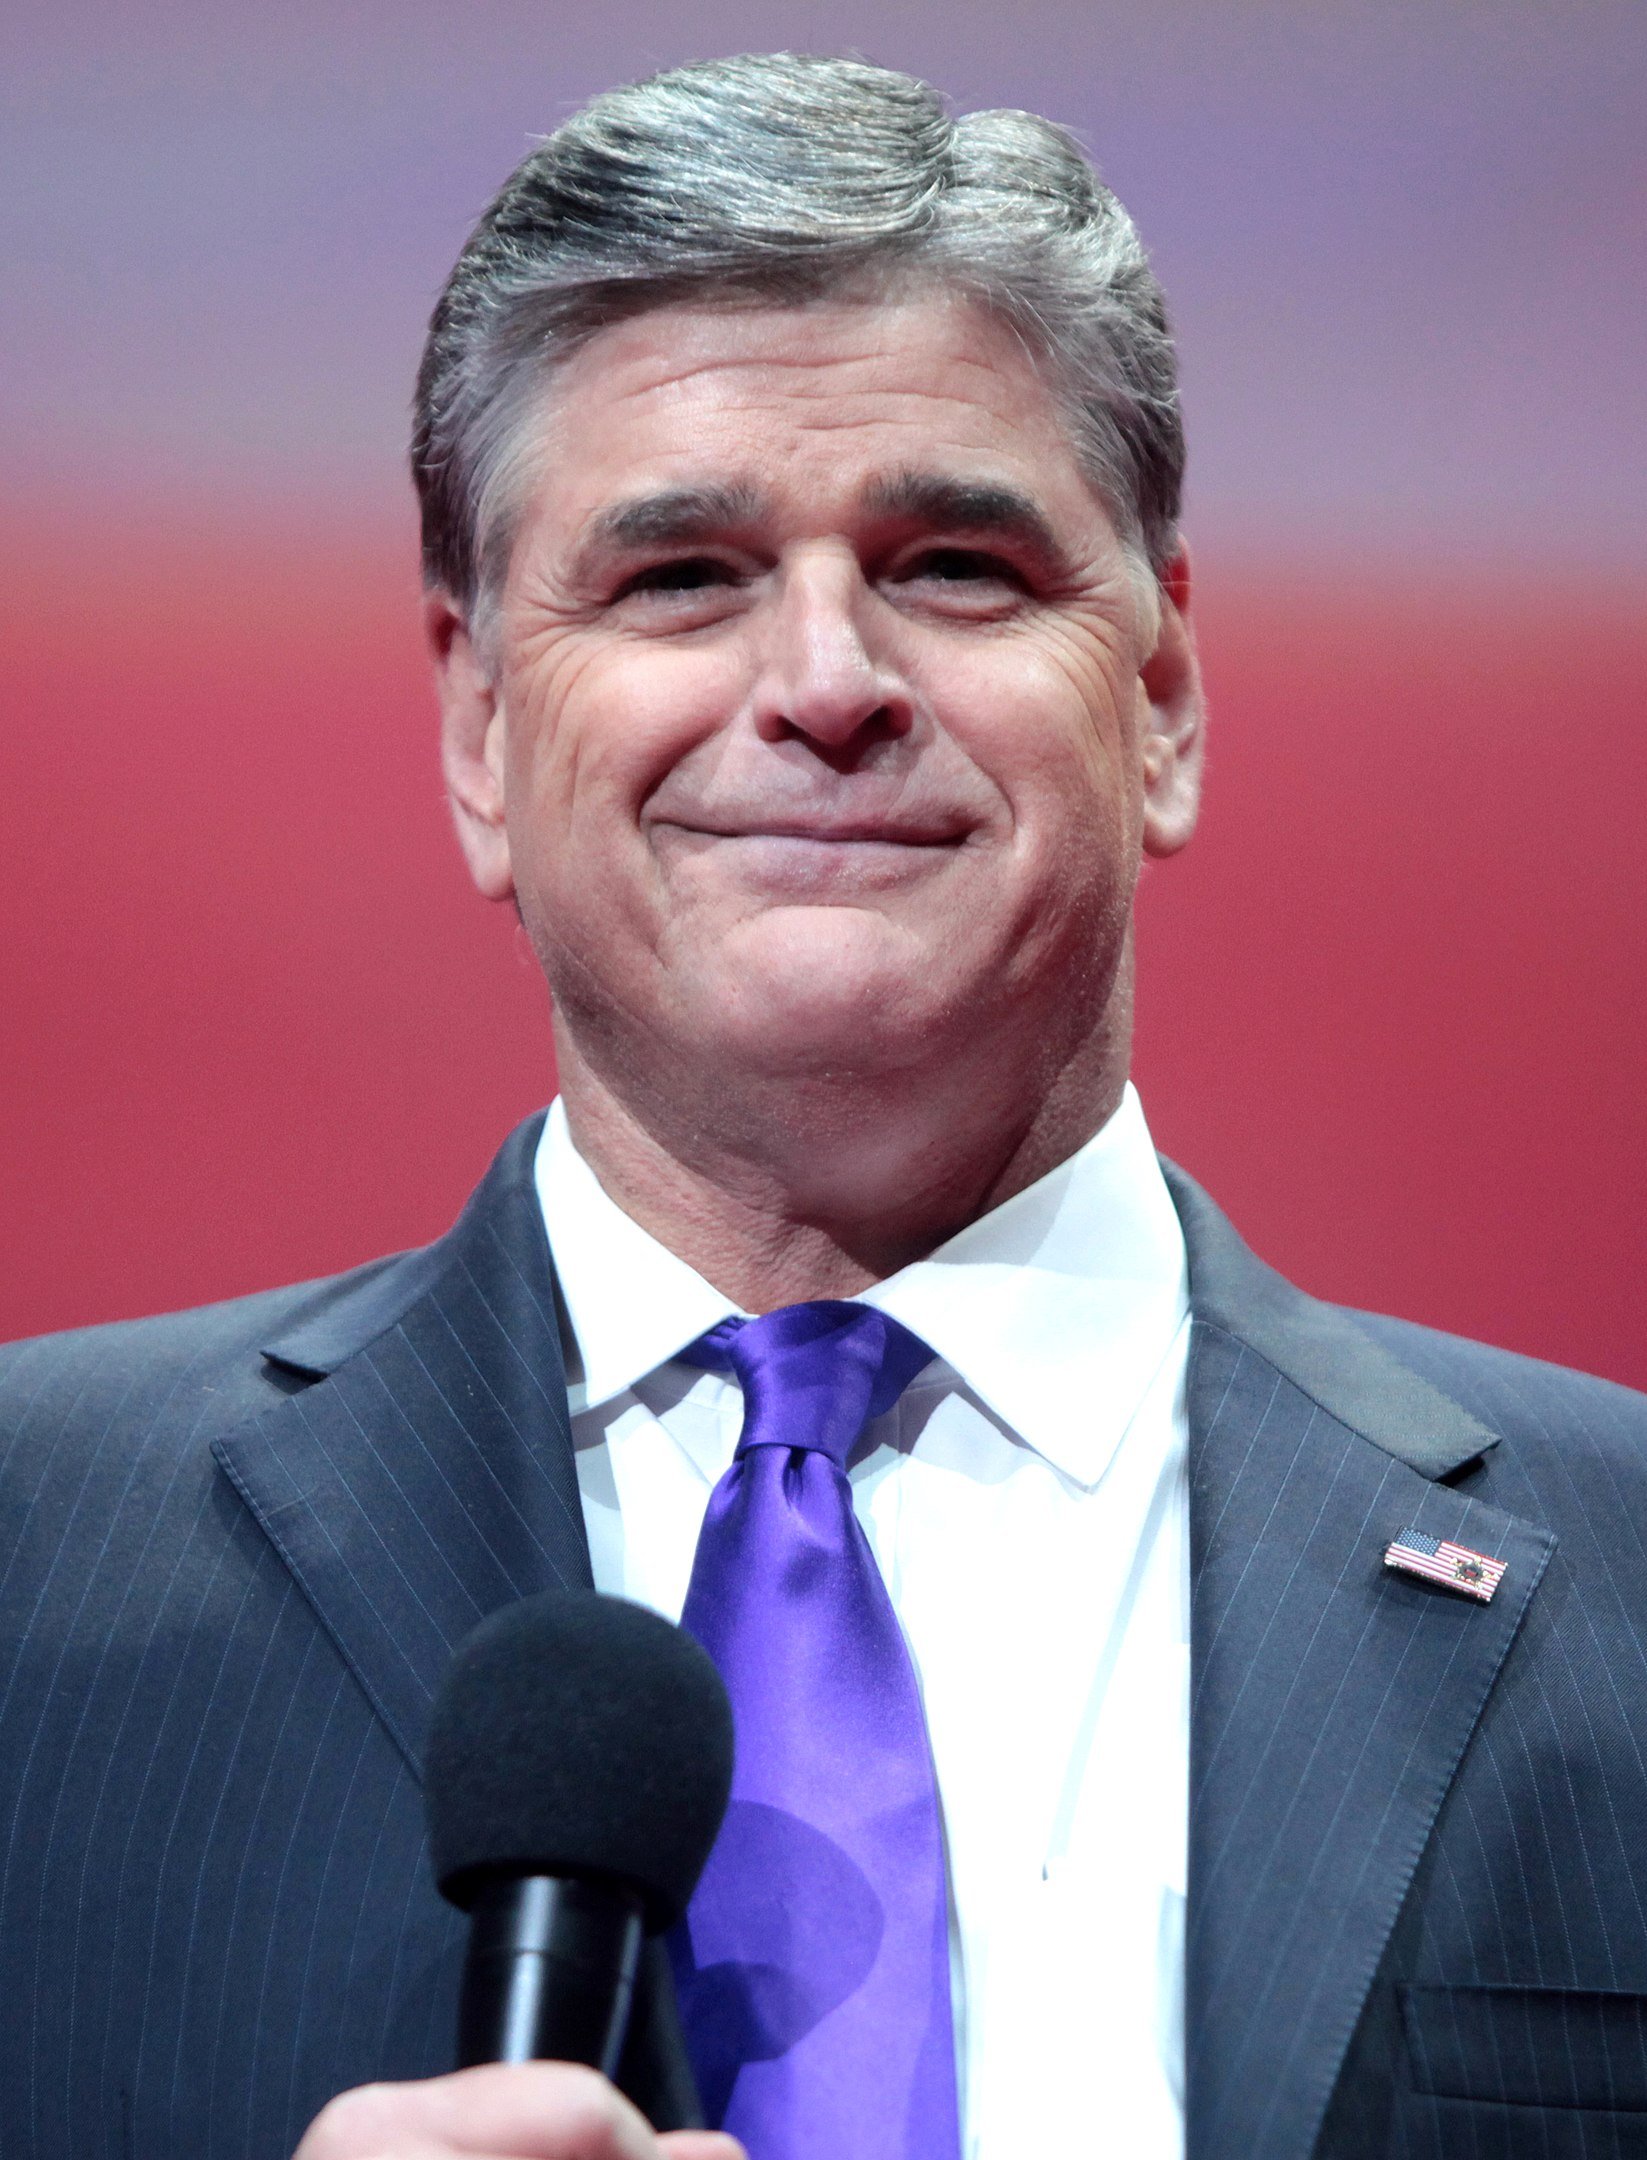 Sean Hannity speaking at an event in Greenville, South Carolina, February 18 2016 | Photo: Wikimedia Commons Images